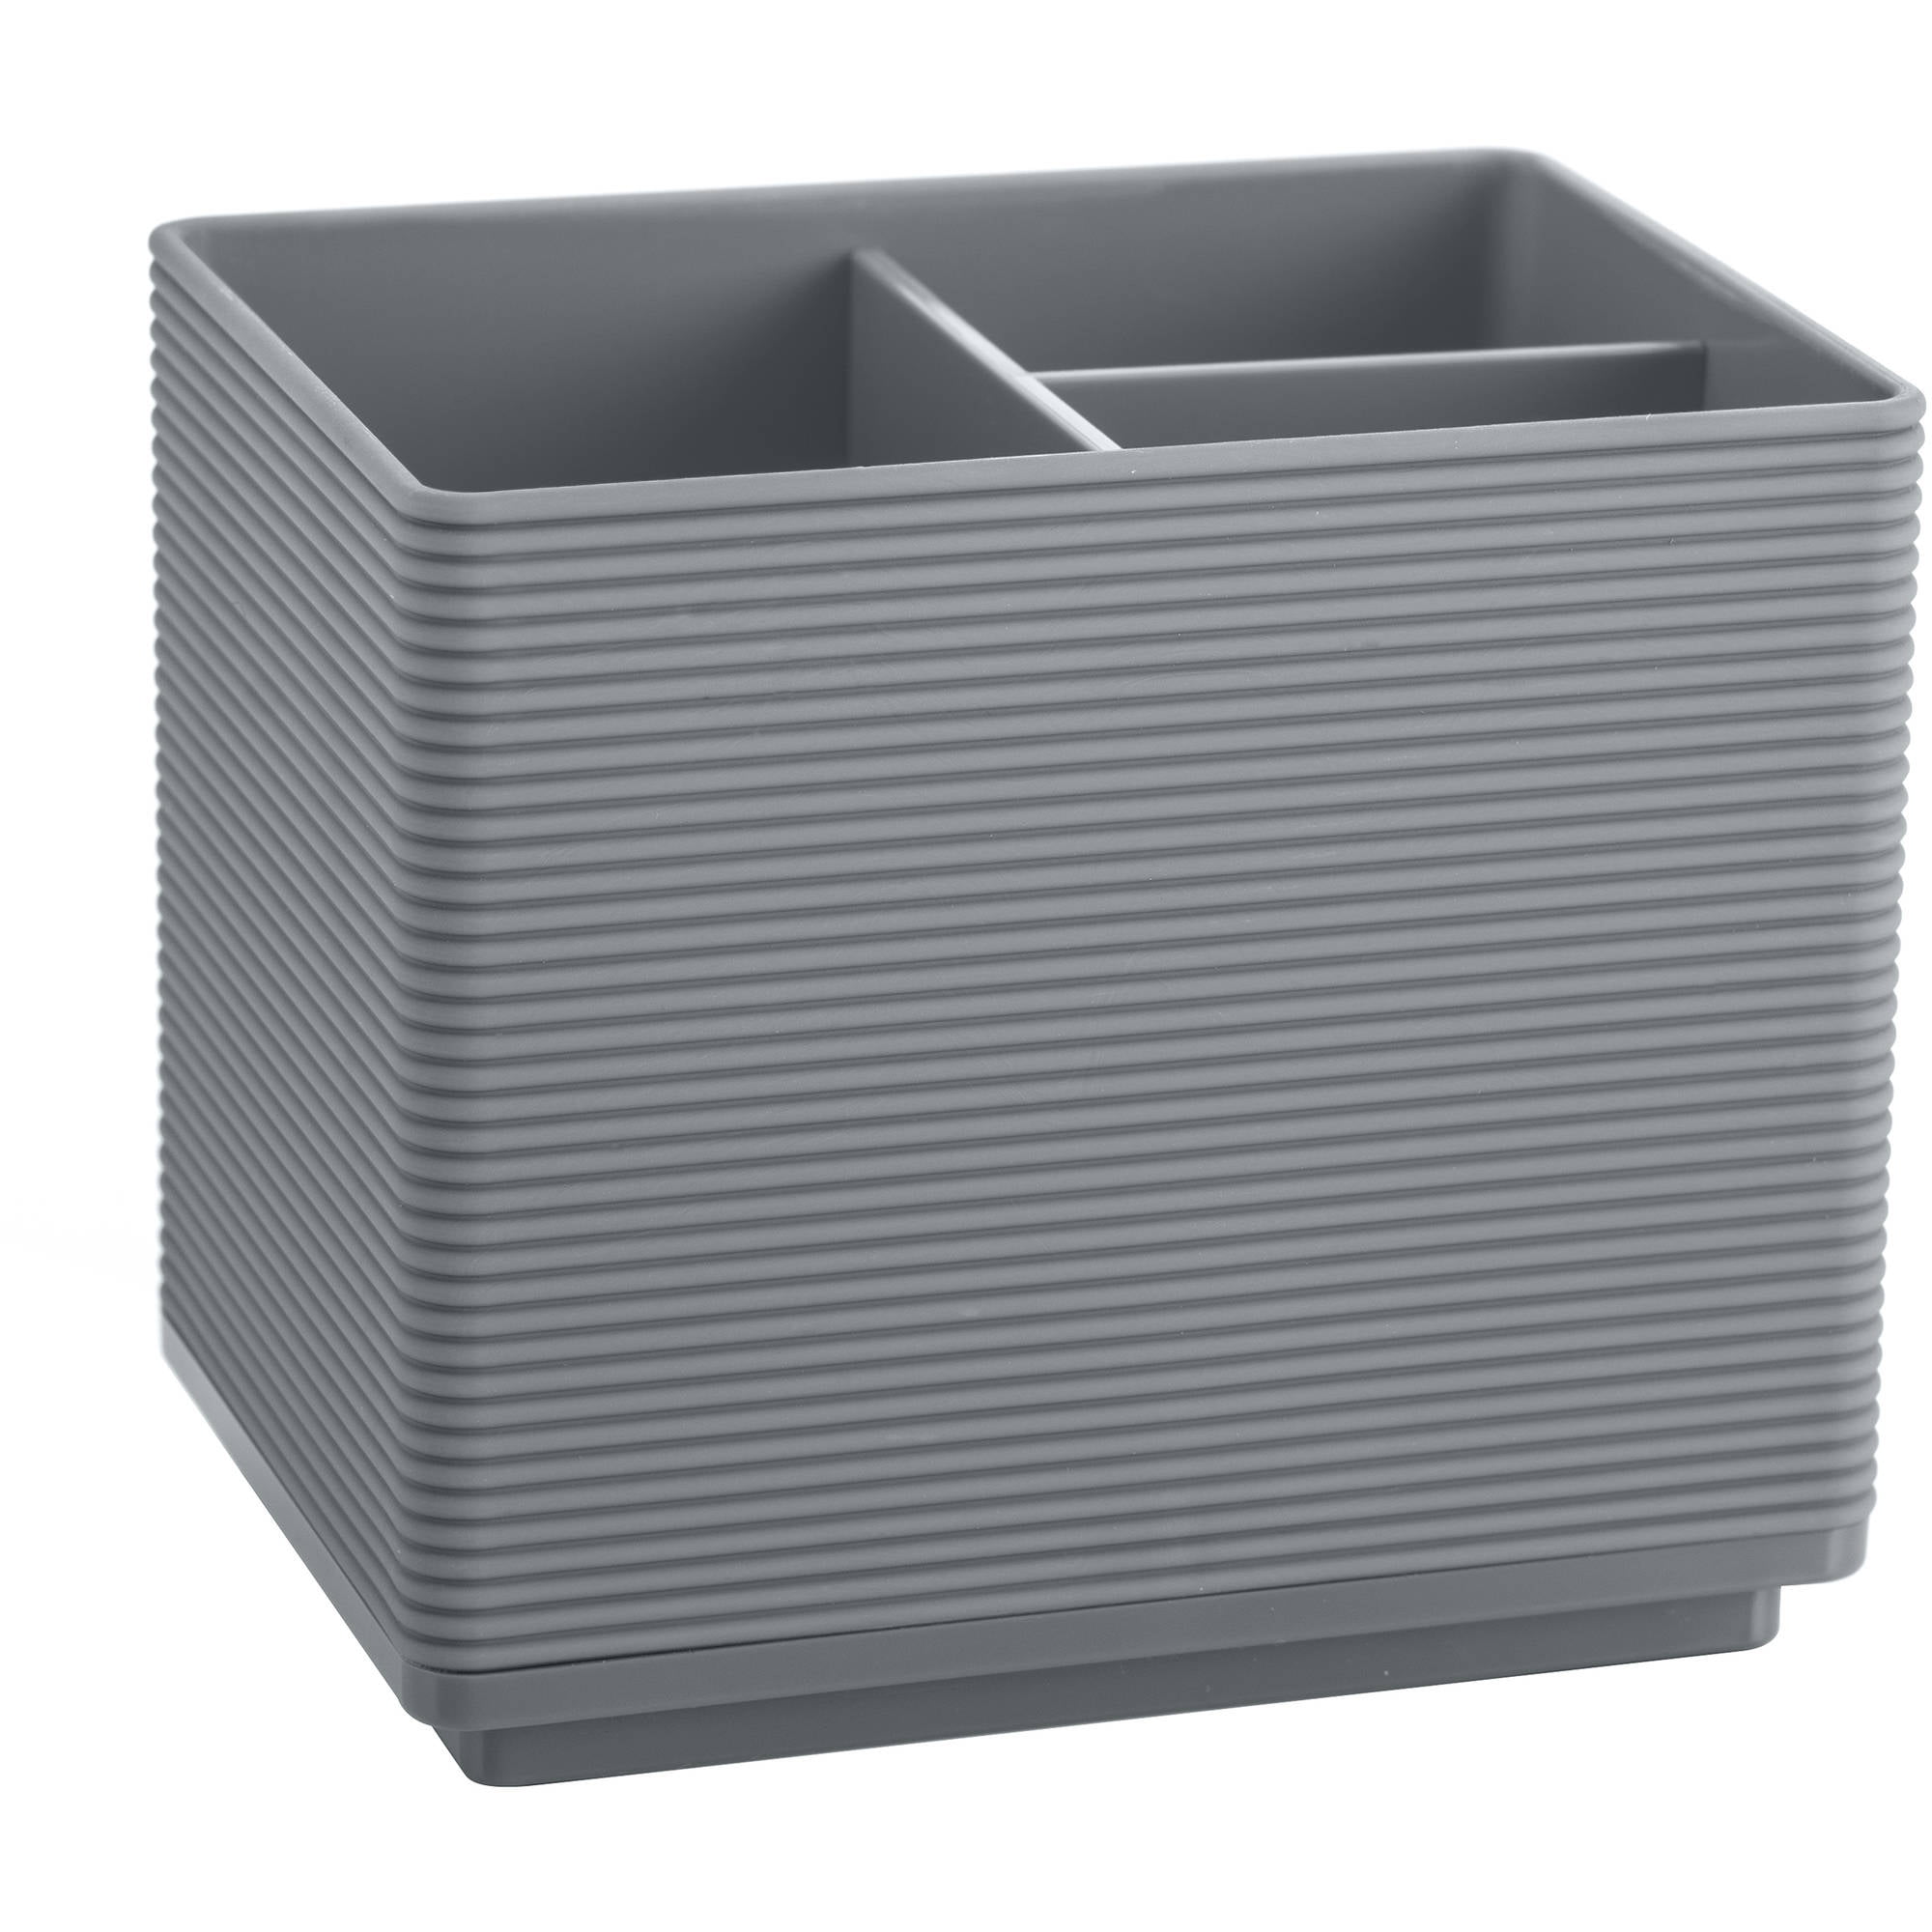 Mainstays Soft Touch Ribbed Plastic Organizer in Grey with 3 Compartments